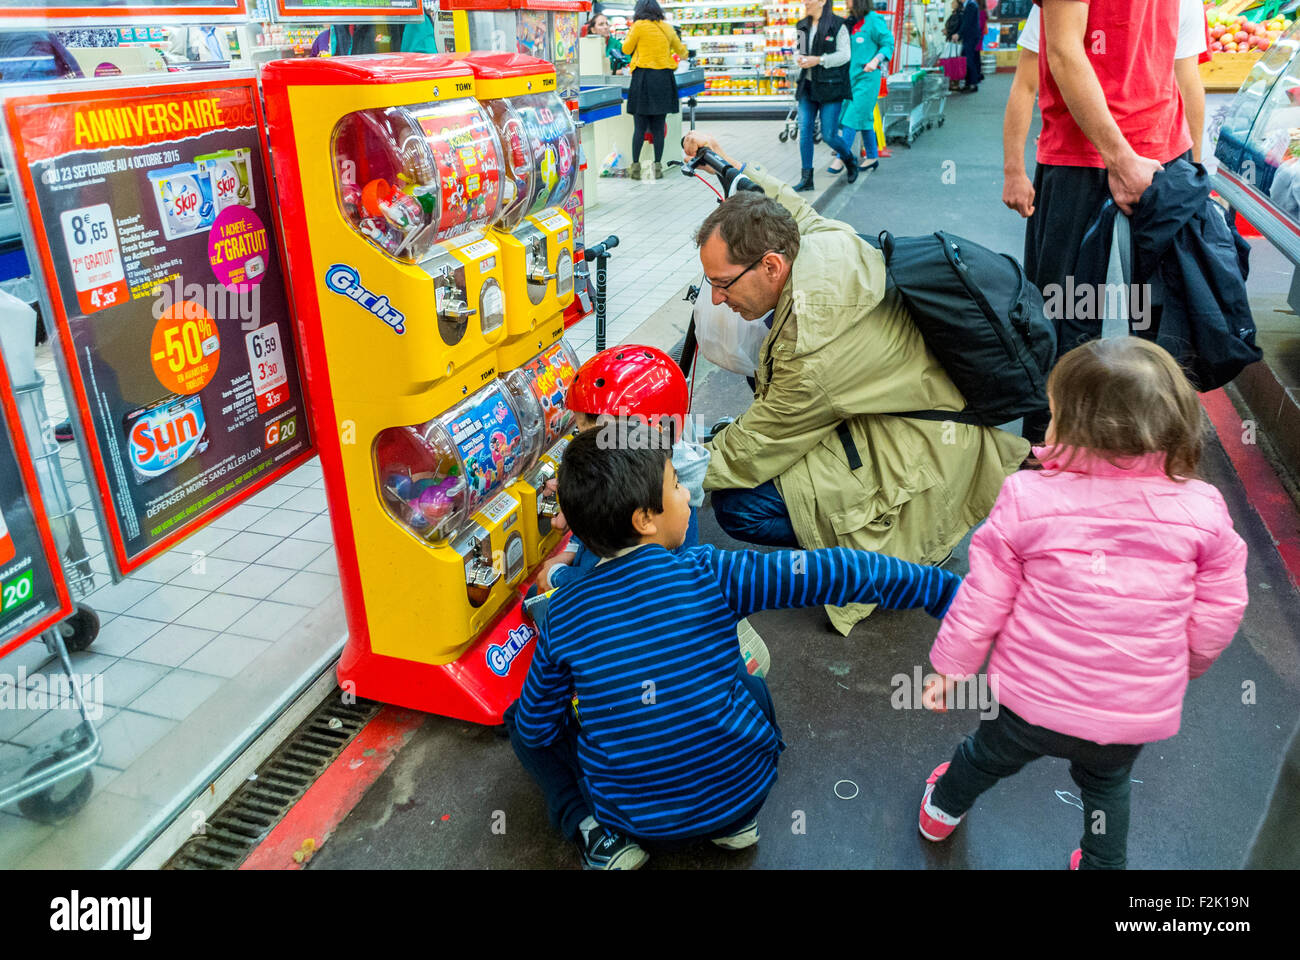 Paris, France, Family Buying Candy at vending Machine, Shopping in Public Market, Marche Batignolles, Inside Stock Photo